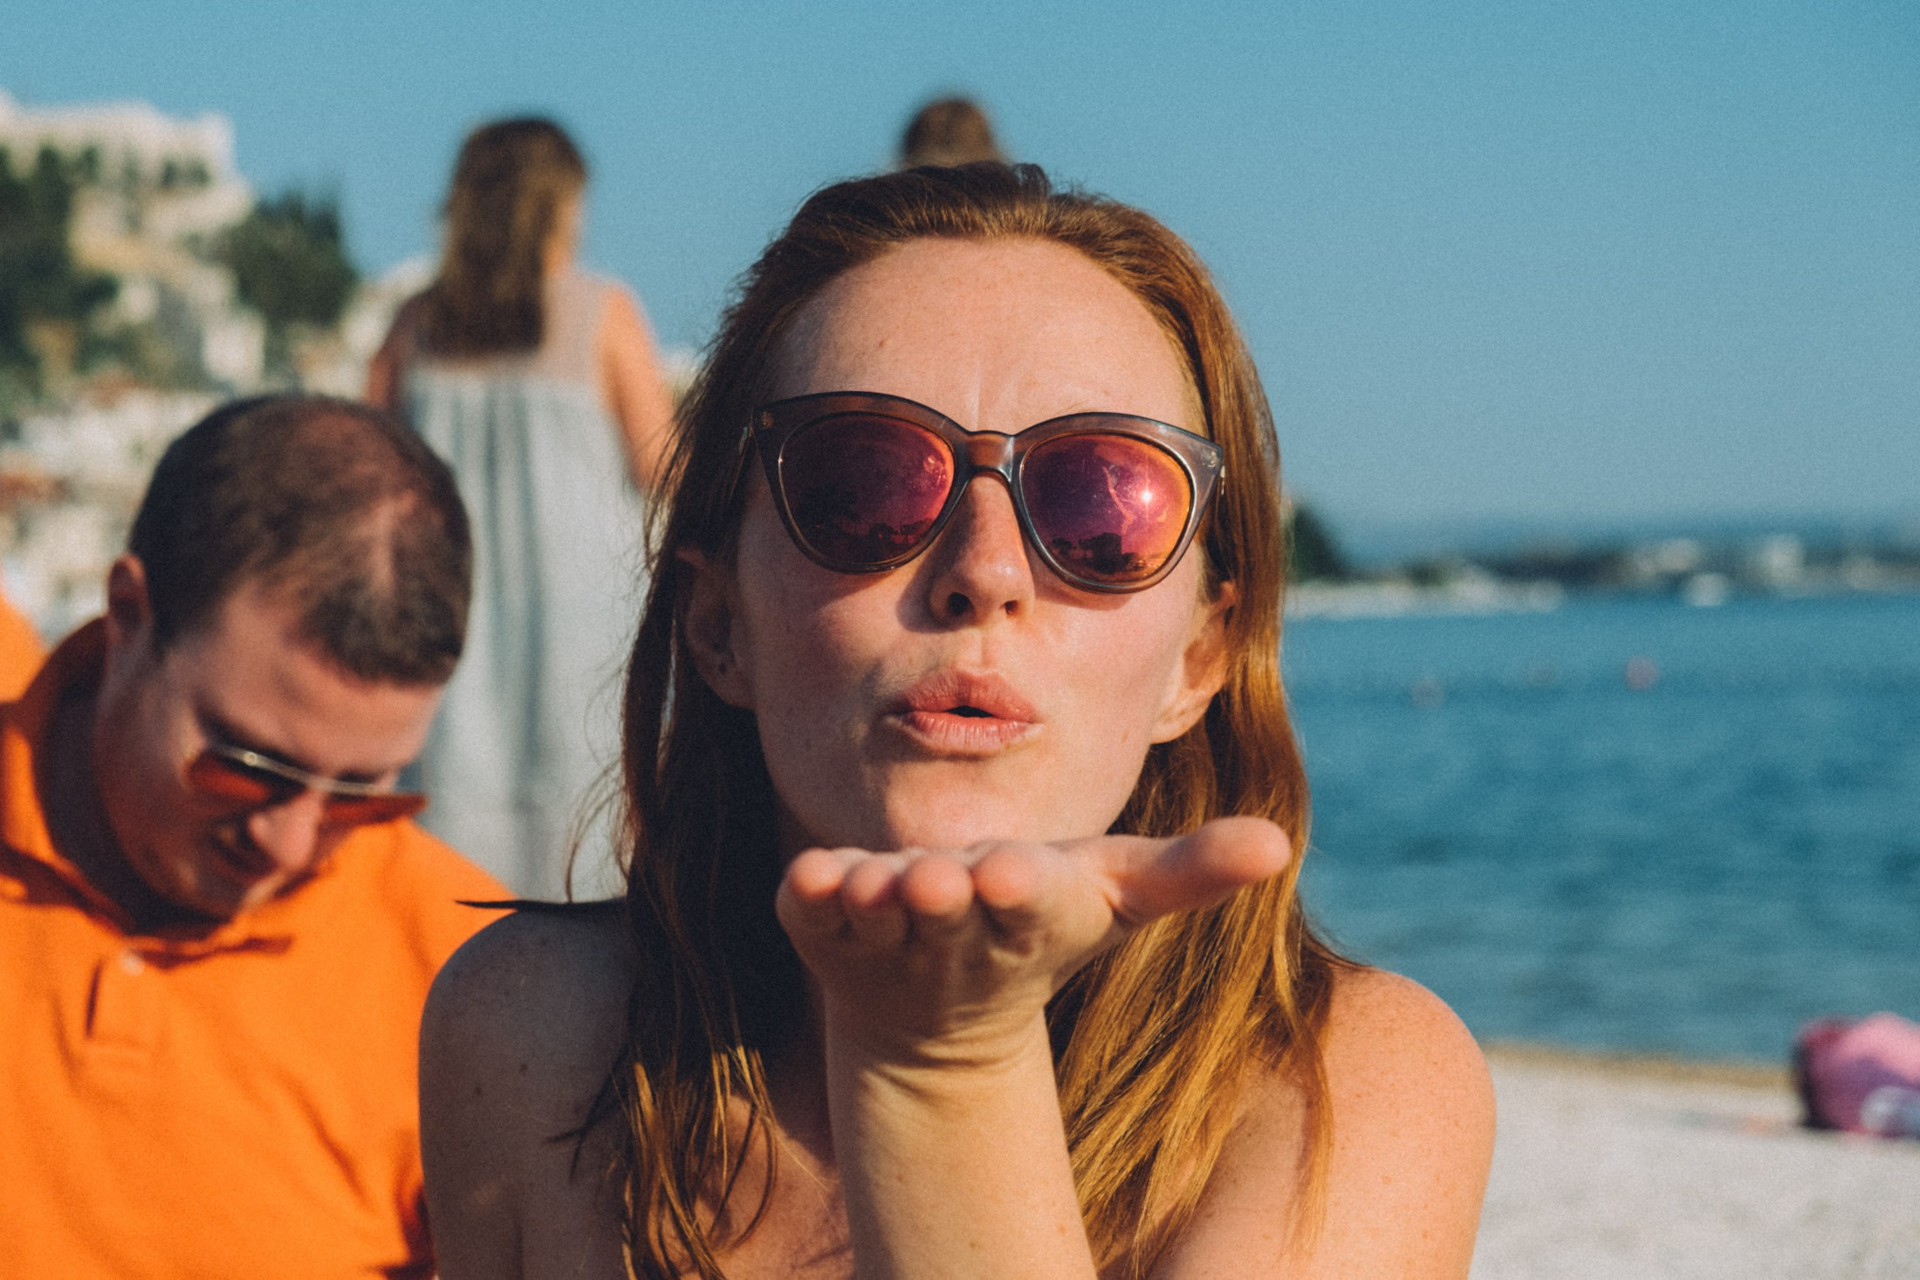 Woman on the beach blowing a kiss to the camera